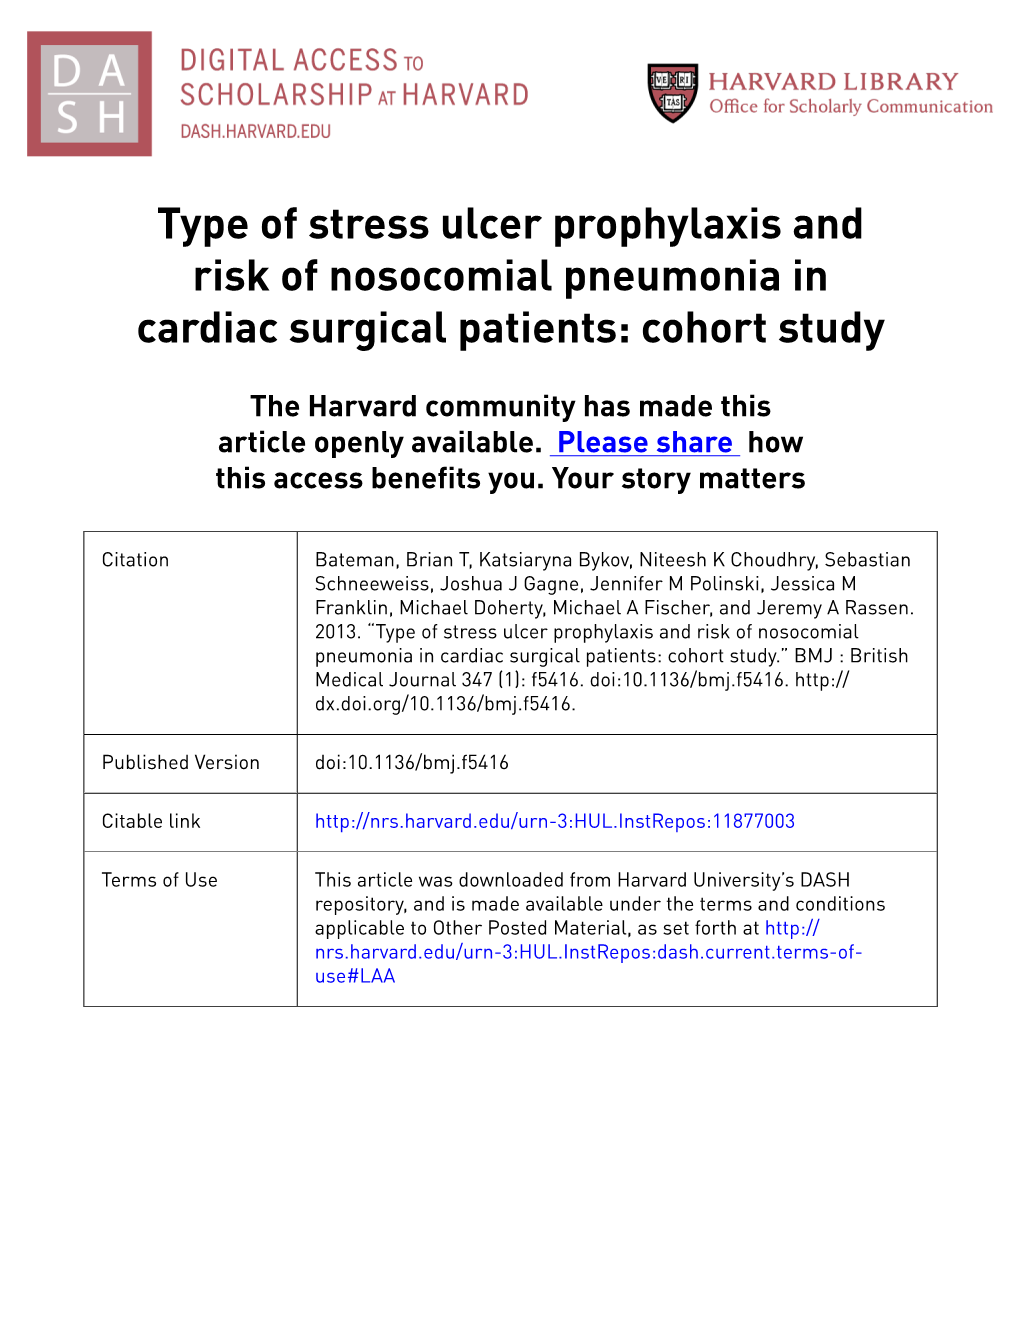 Type of Stress Ulcer Prophylaxis and Risk of Nosocomial Pneumonia in Cardiac Surgical Patients: Cohort Study